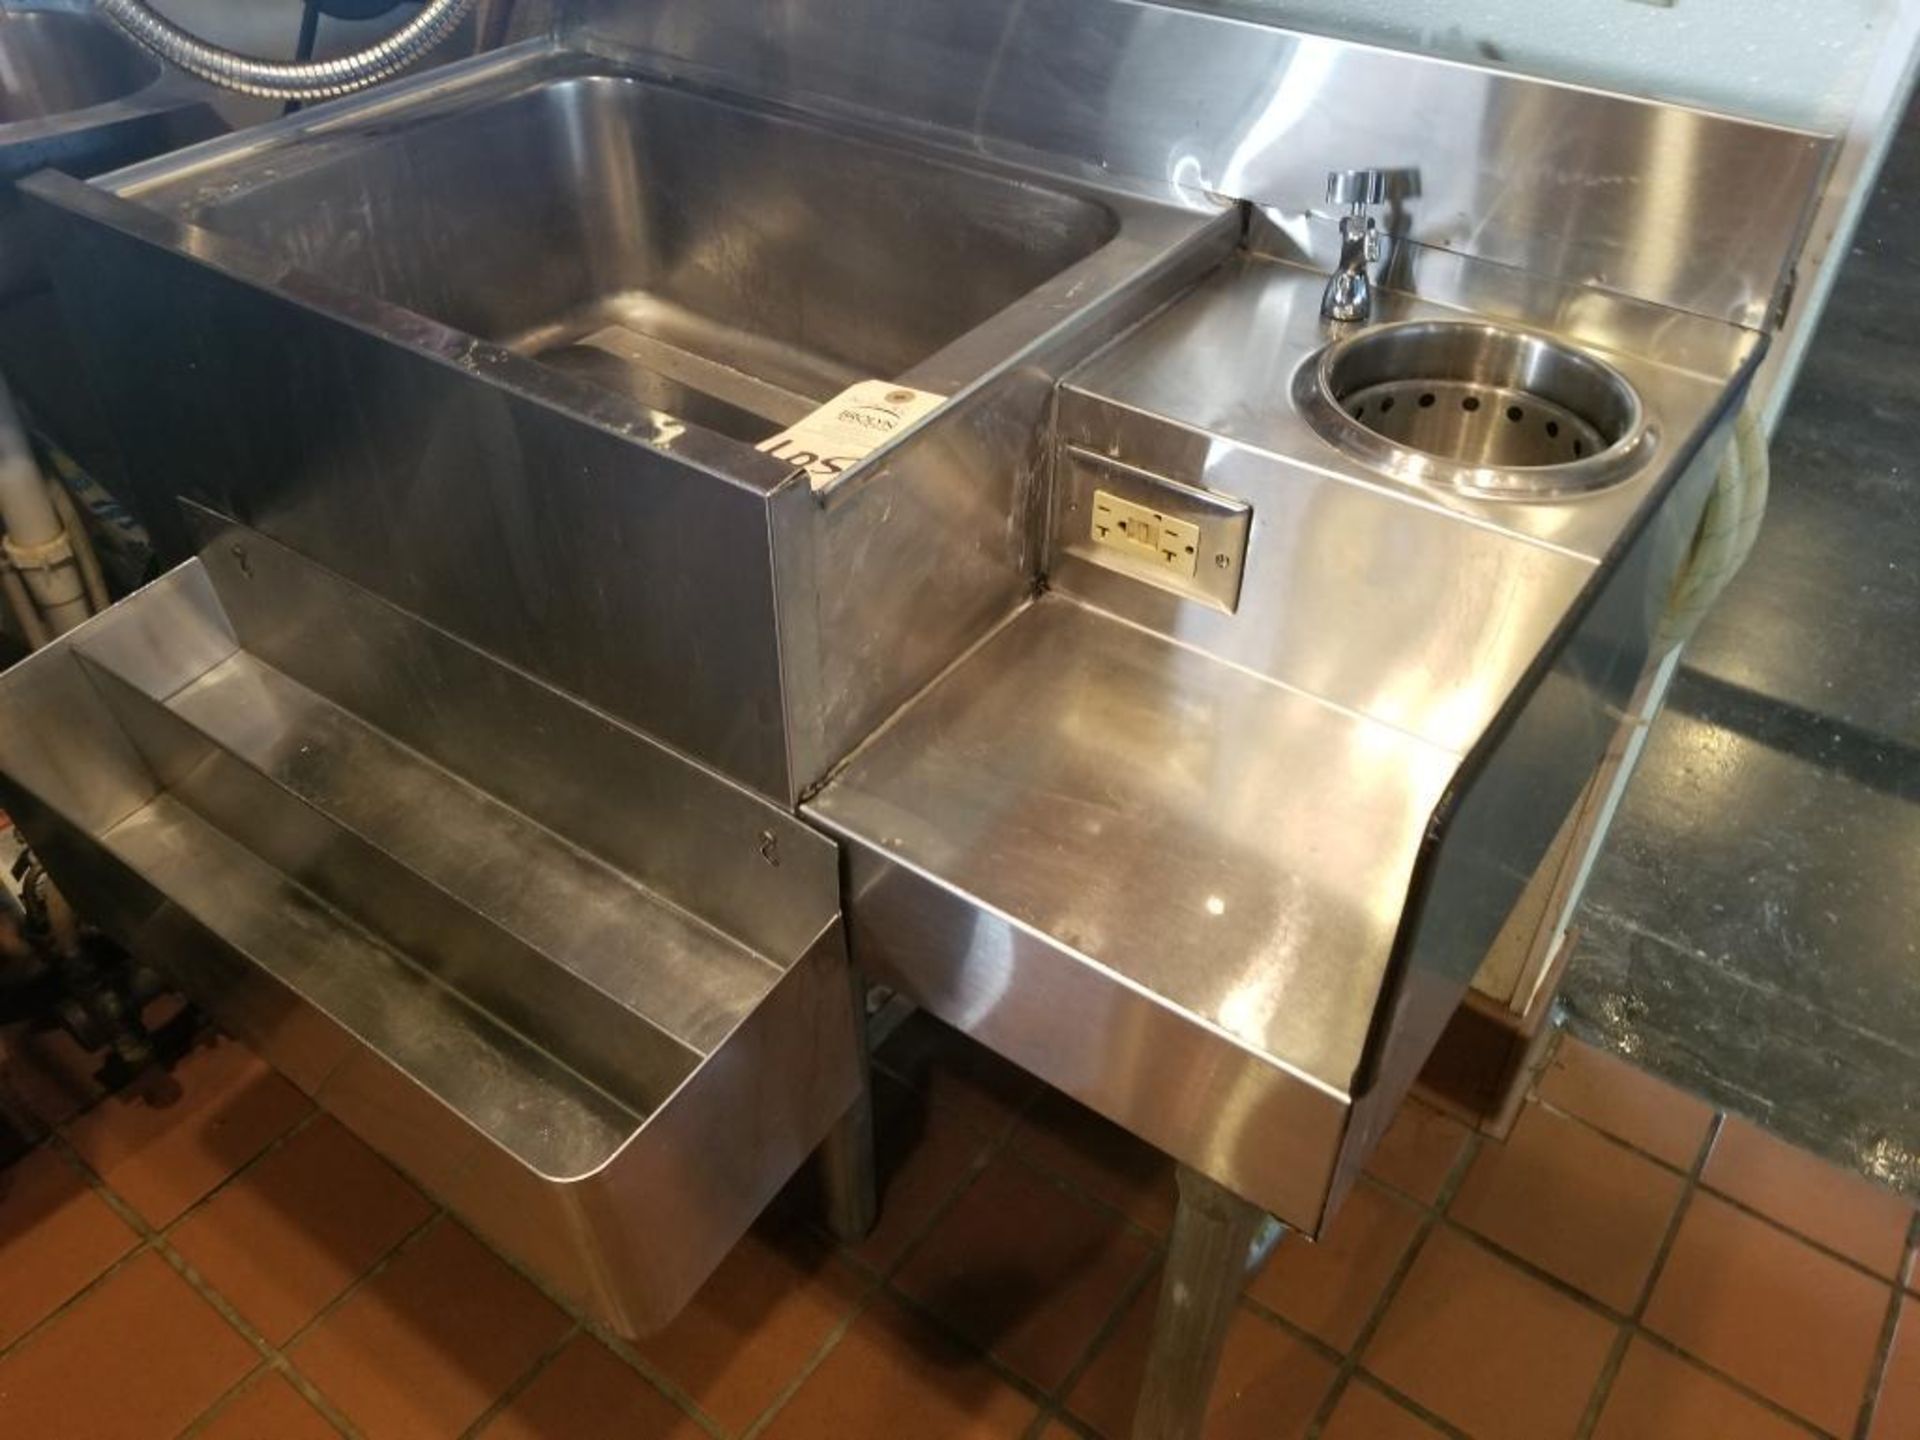 Stainless Steel prep table. 36" x 26" x 30".